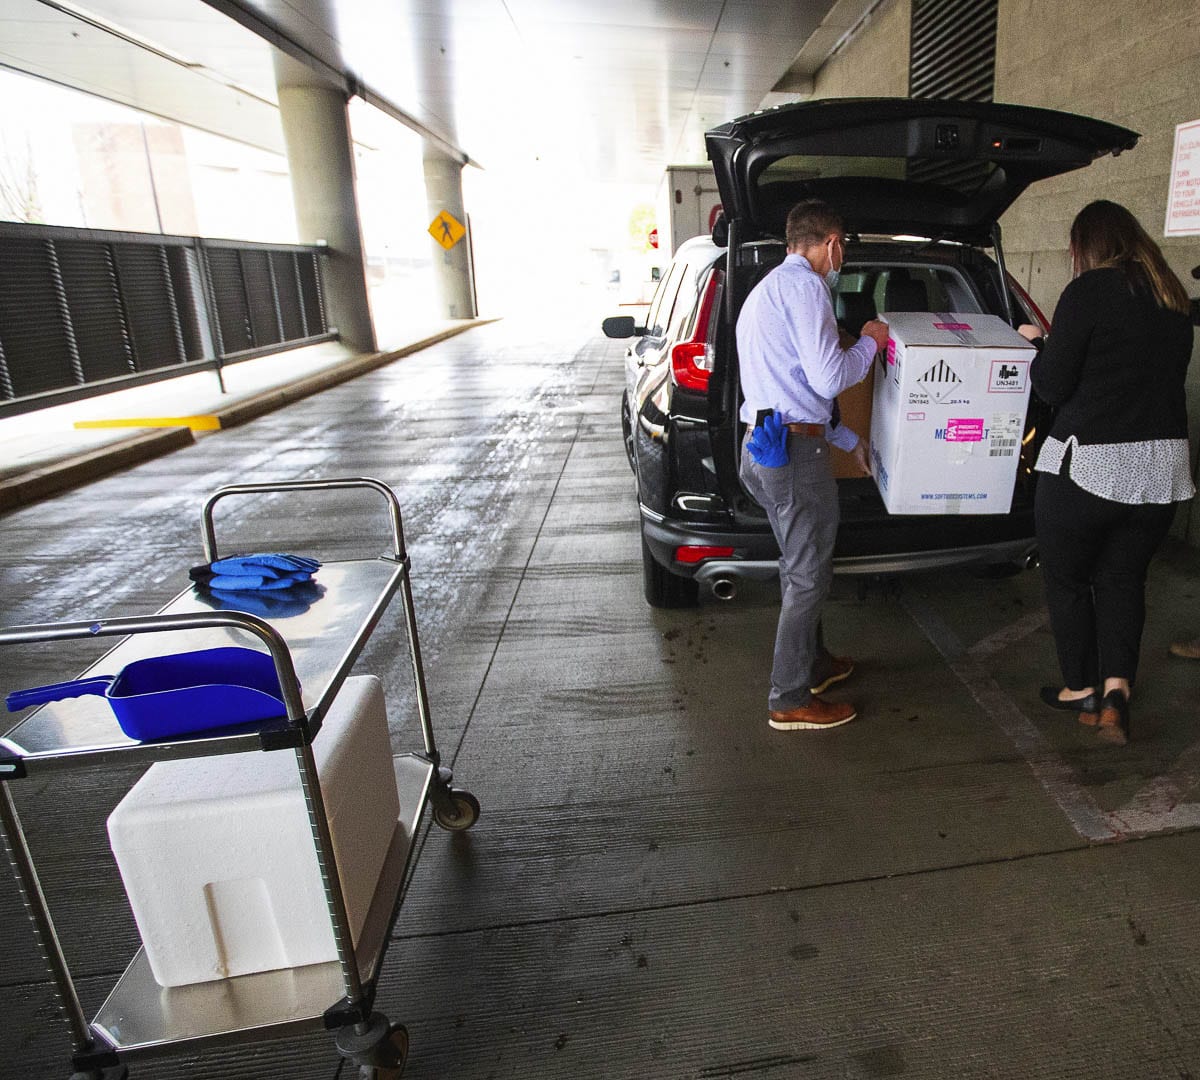 Shipments of Pfizer’s COVID-19 vaccine are kept in dry ice and carefully transported from the University of Washington Medical Center. Photo courtesy The Seattle Times